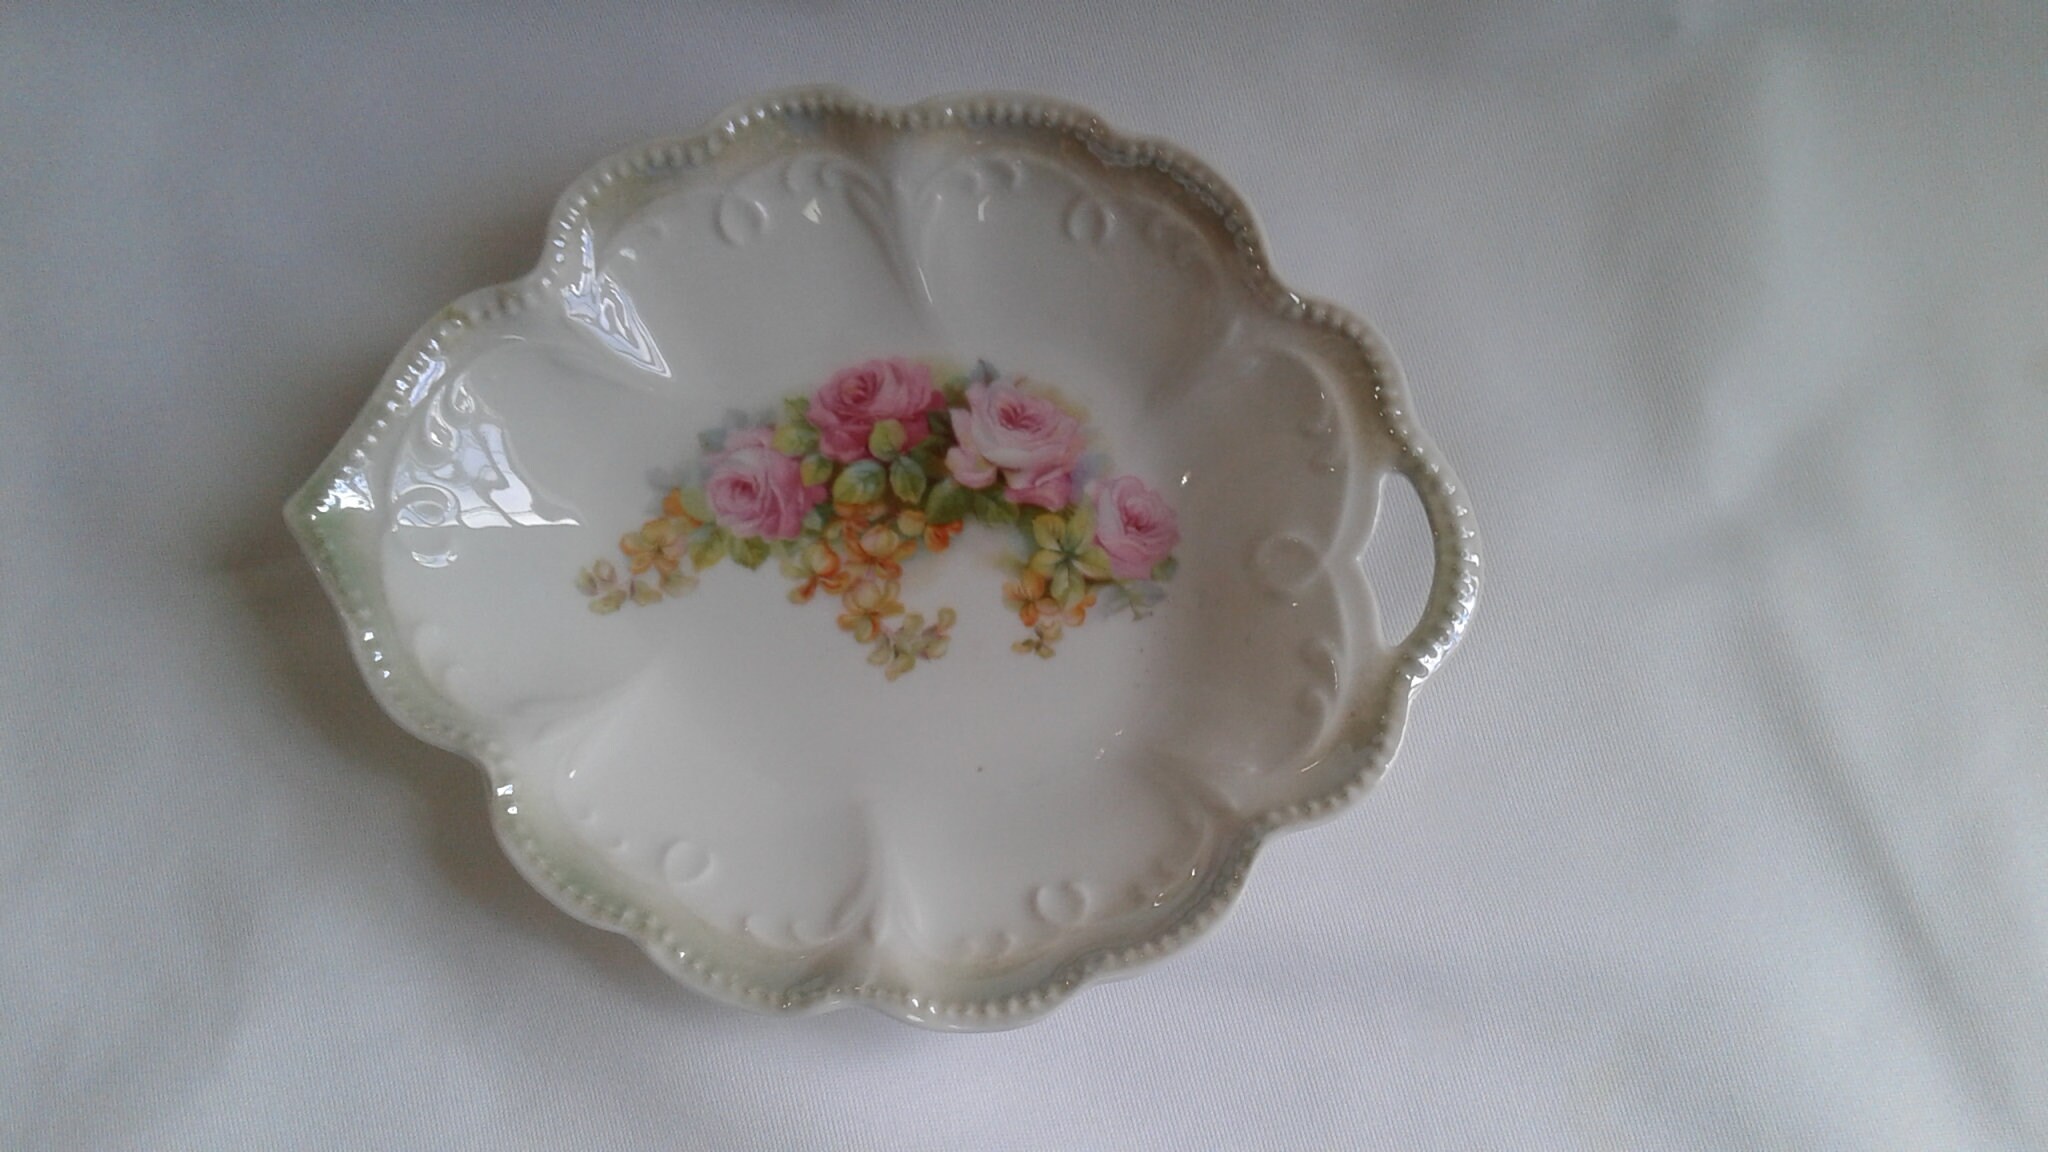 European Shabby Chic Cottage Rose Scallop Bowl by P S Sorau Germany